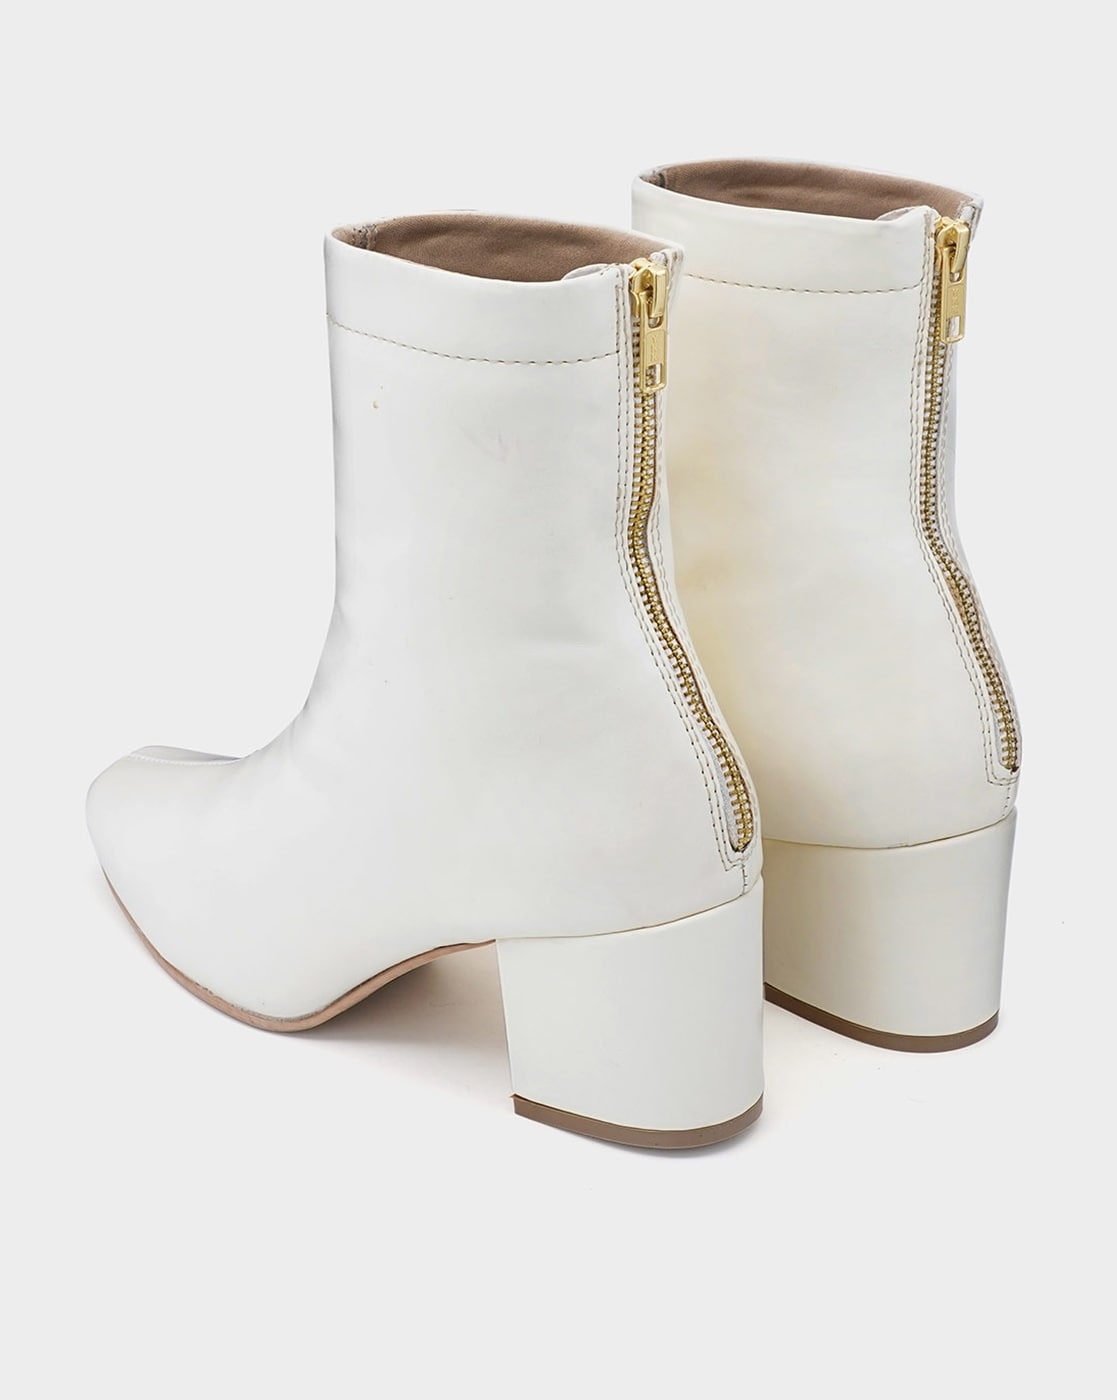 Christian Louboutin Ziptotal 85 Leather Ankle Boots in White | Lyst